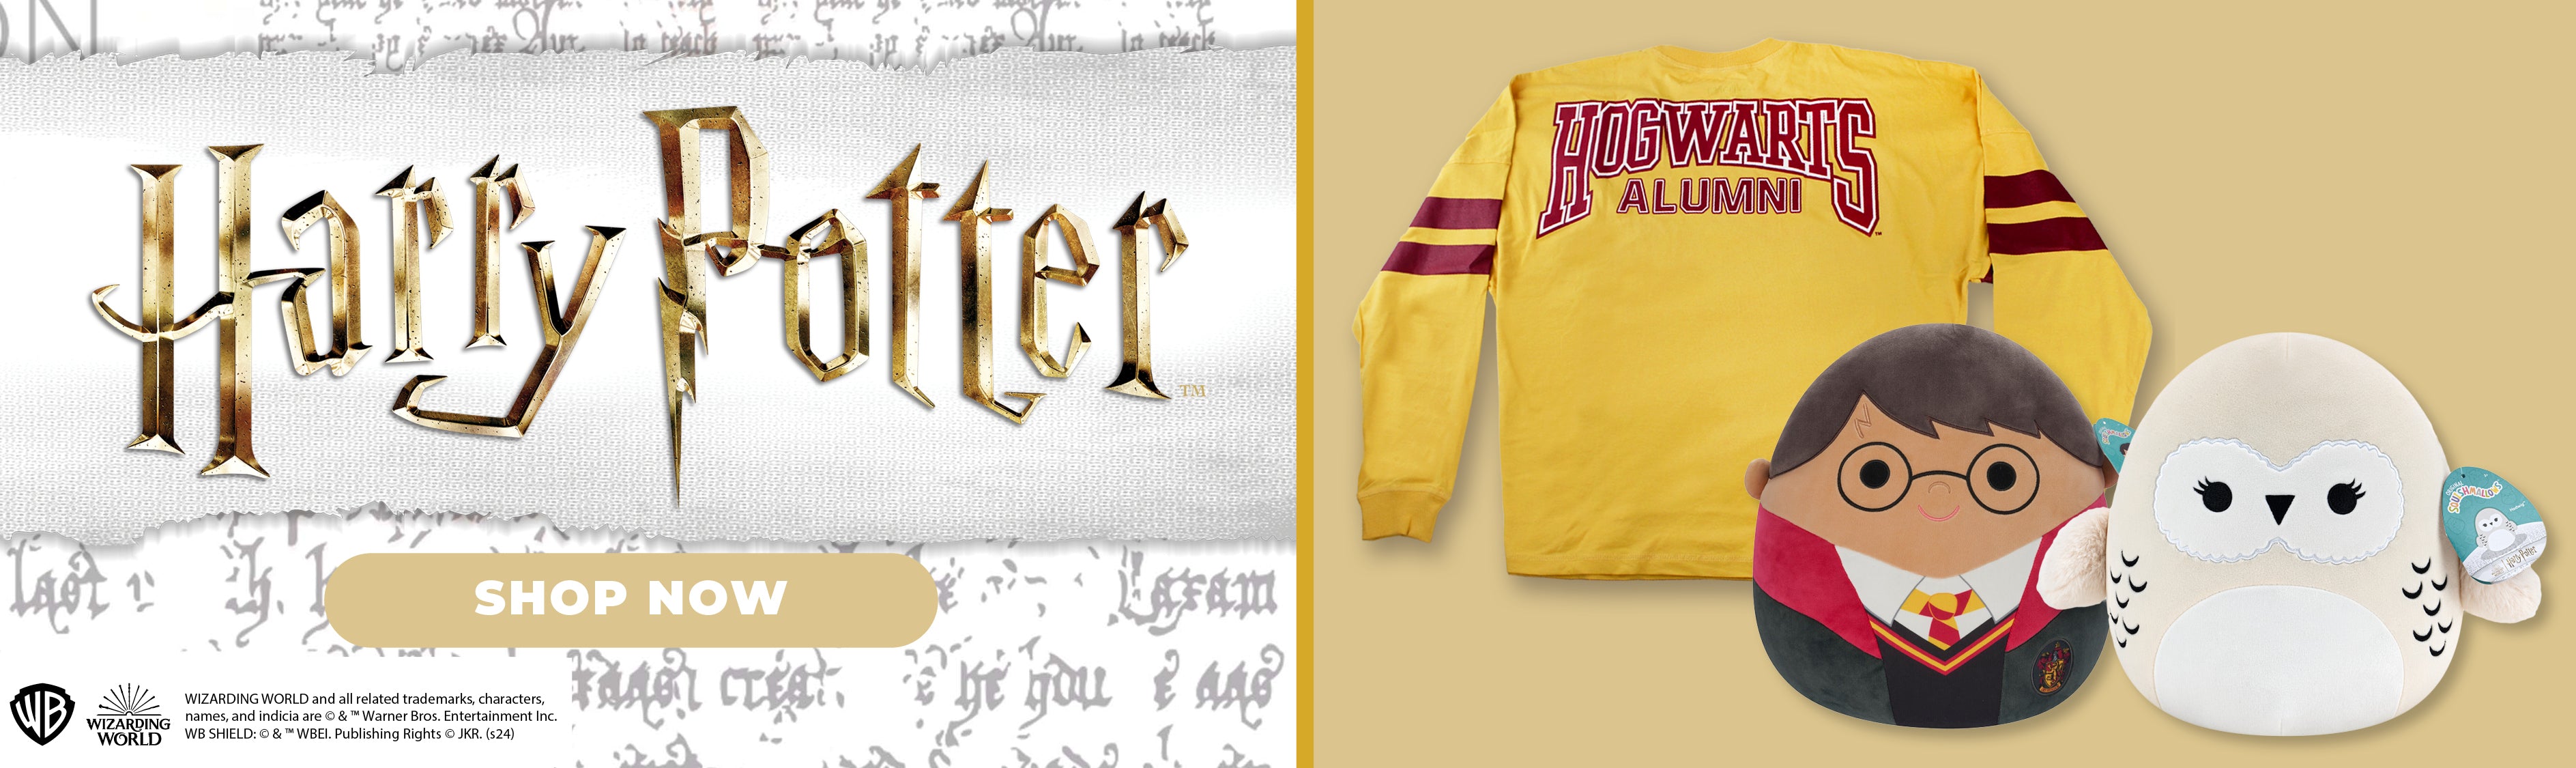 Harry Potter Collection - Shop Now!